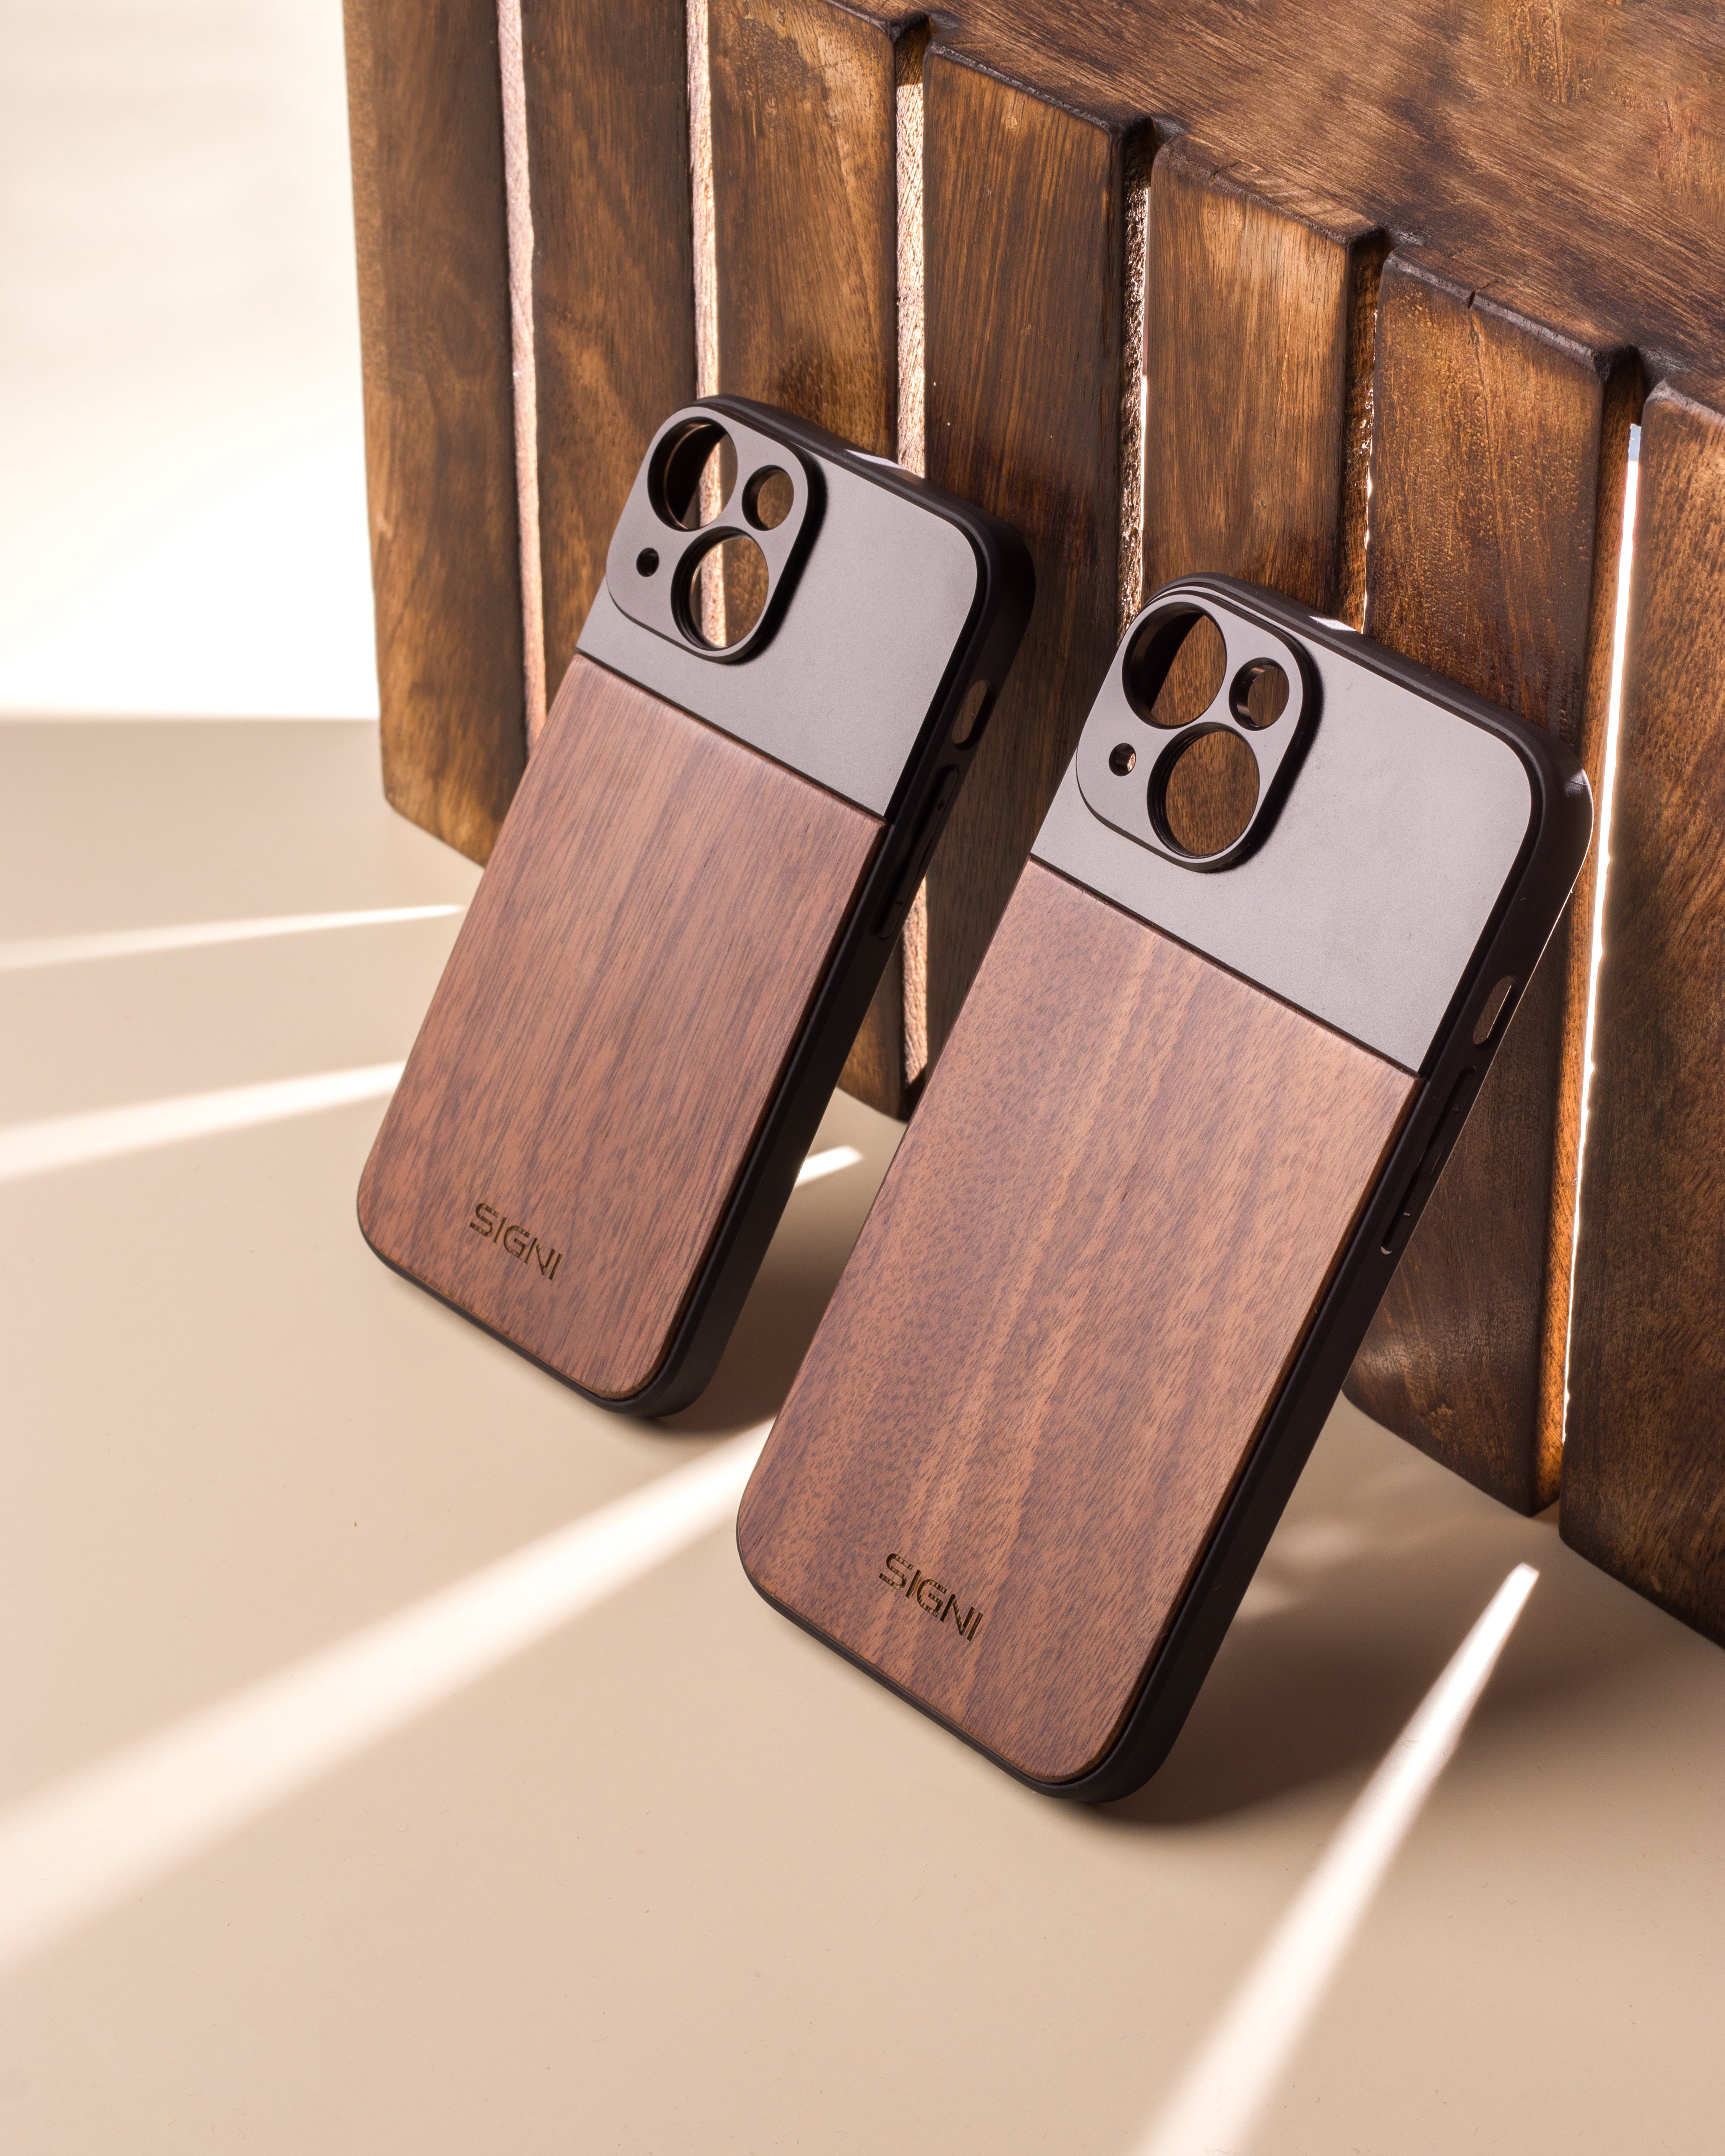 SKYVIK SIGNI One Wooden Mobile Lens case for iPhone 7, 8 & Se 2020